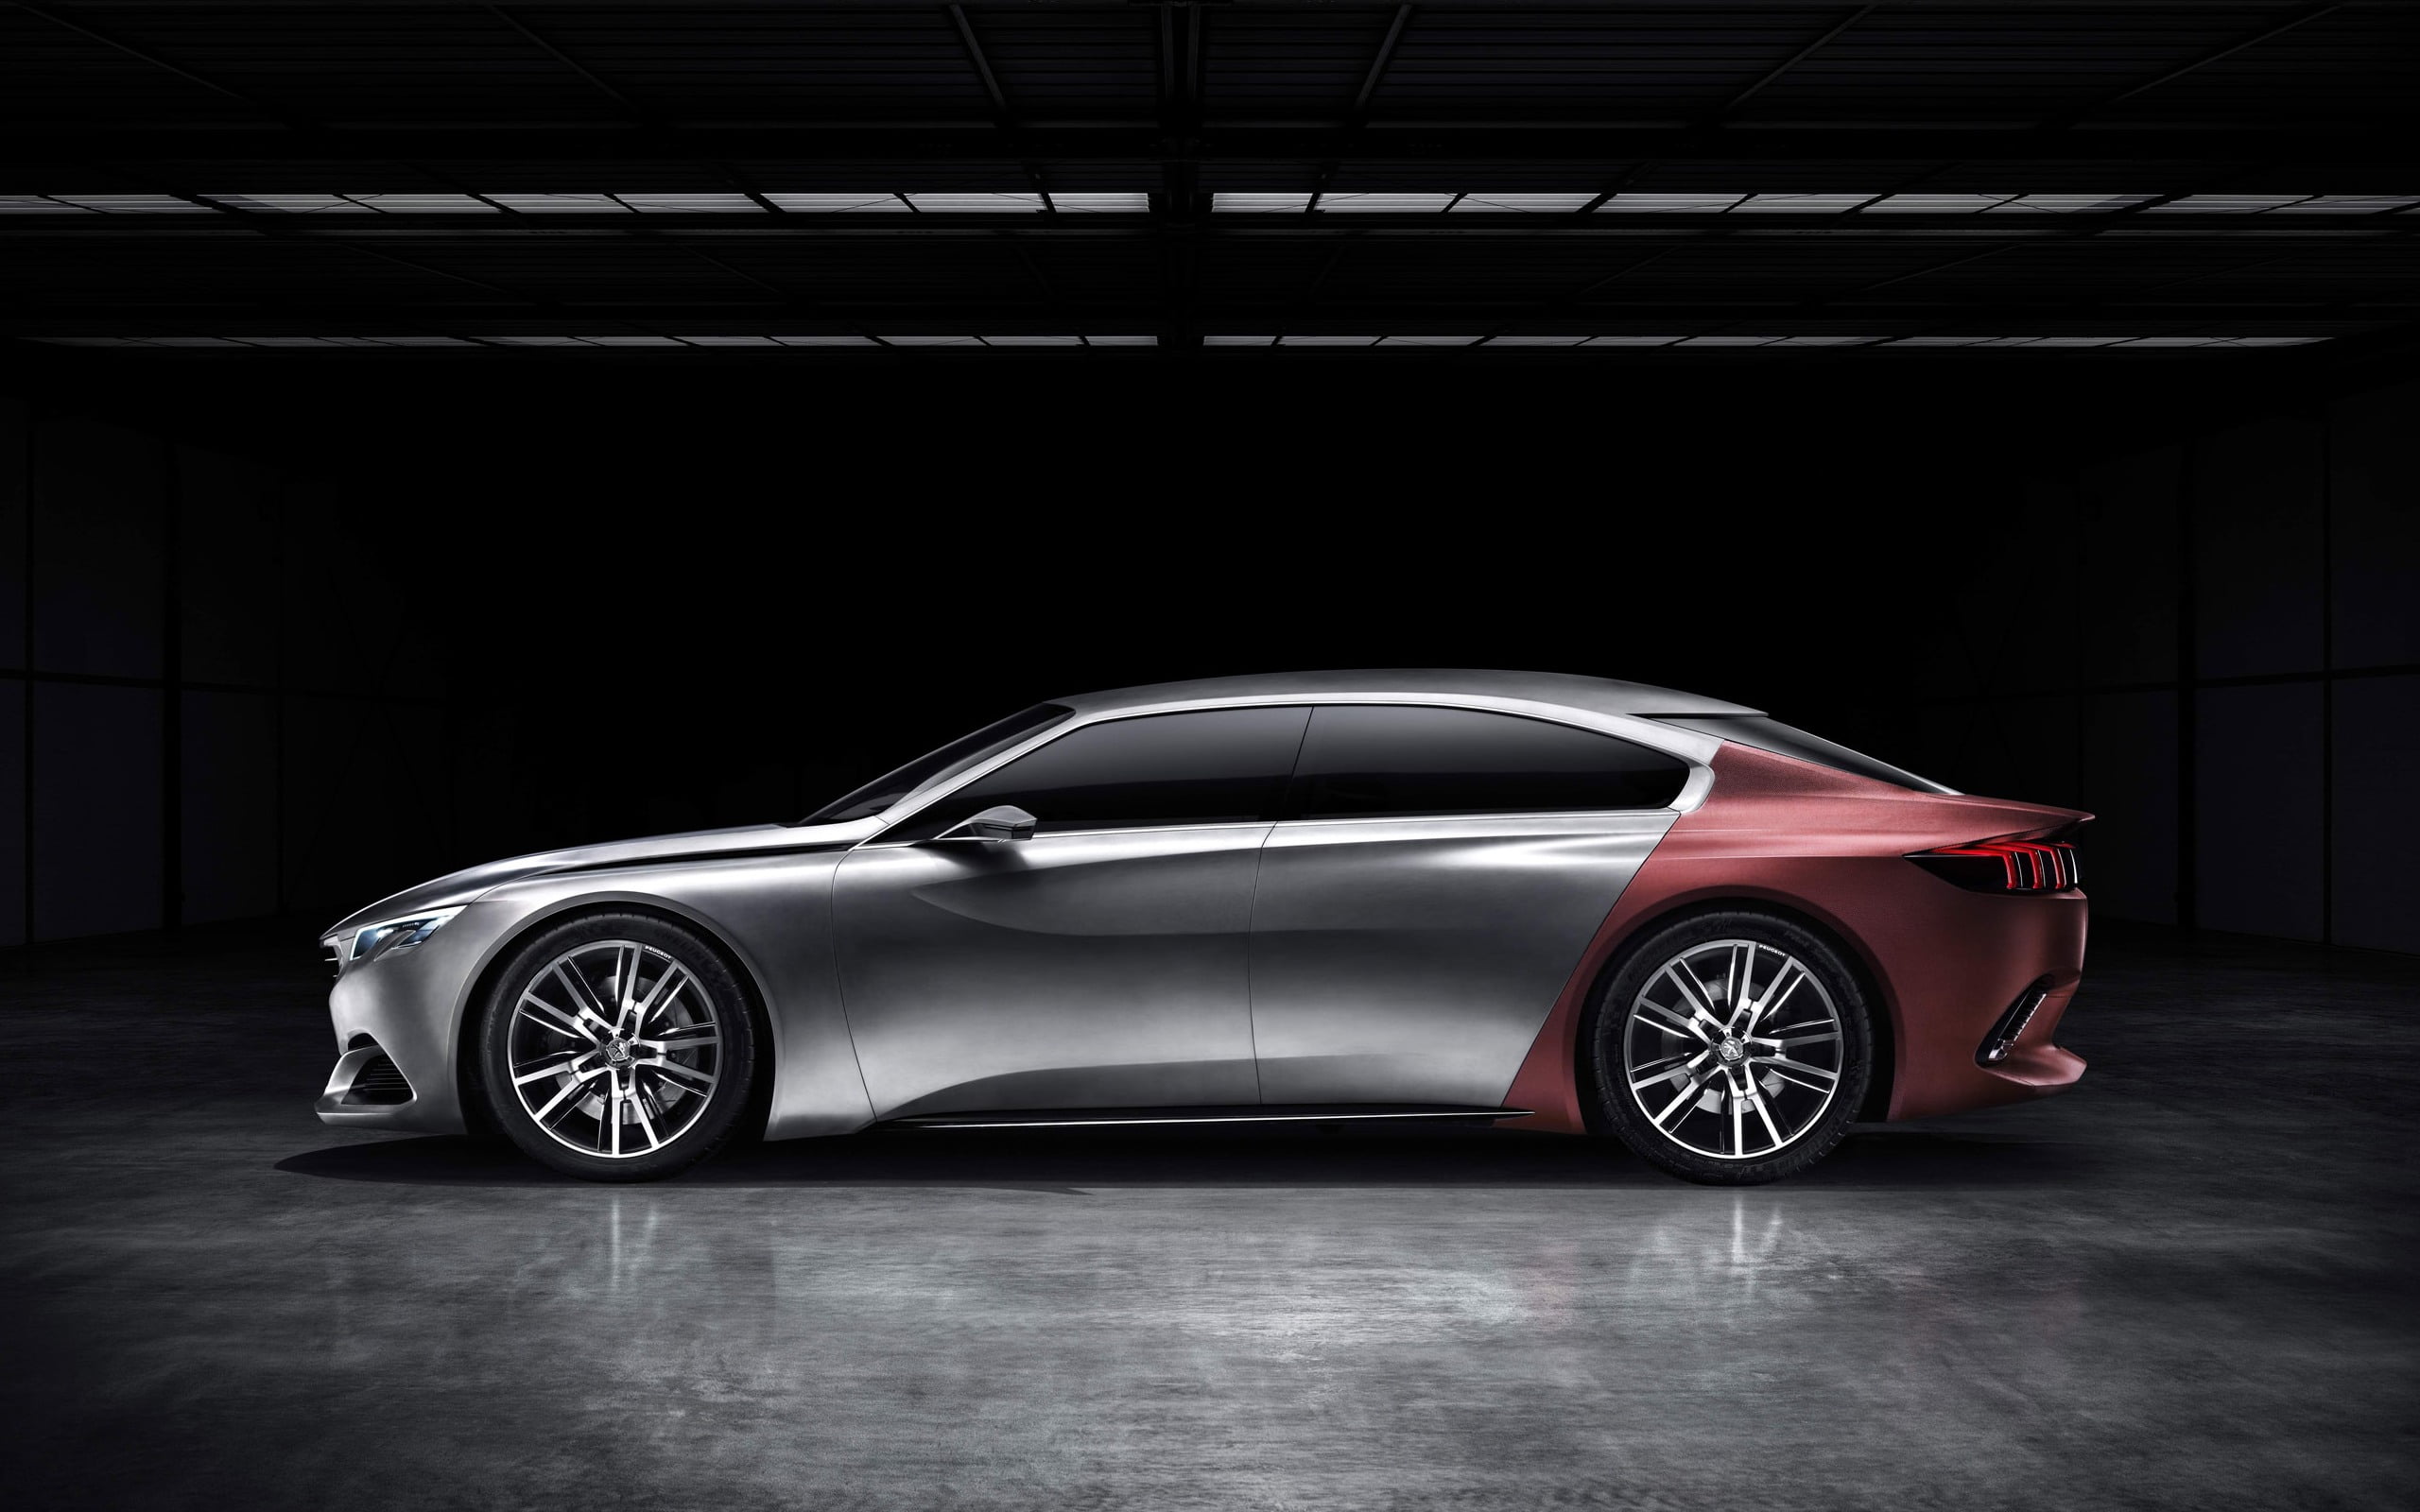 Peugeot Exalt Concept 2014, silver and red coupe, Cars, motor vehicle